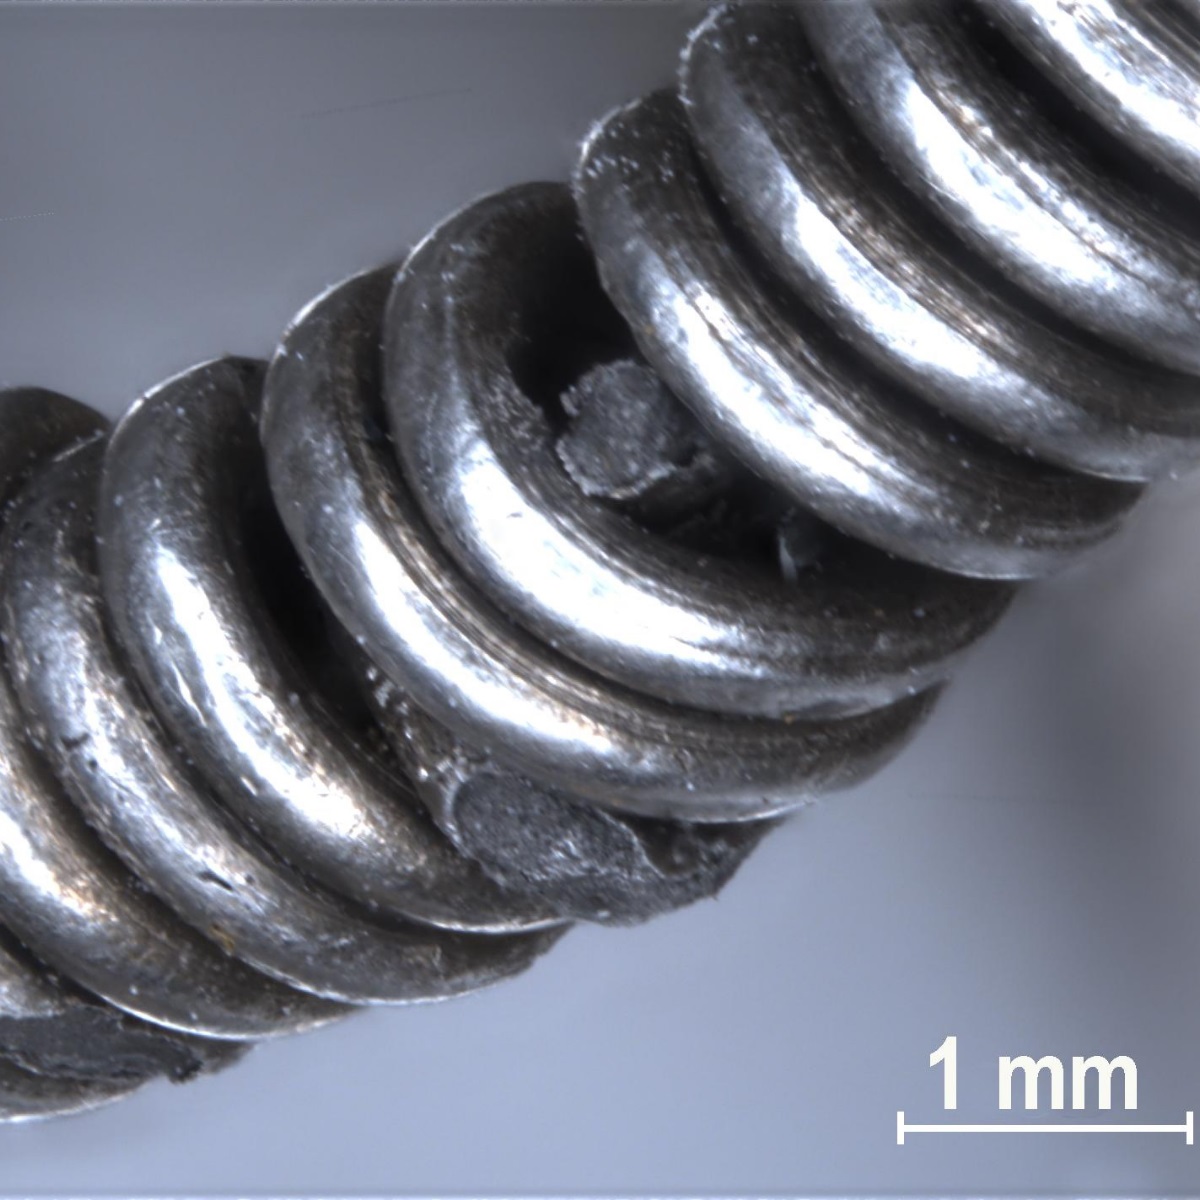 Microscope view of the silver chain, showing how sections of the chain were coiled together.